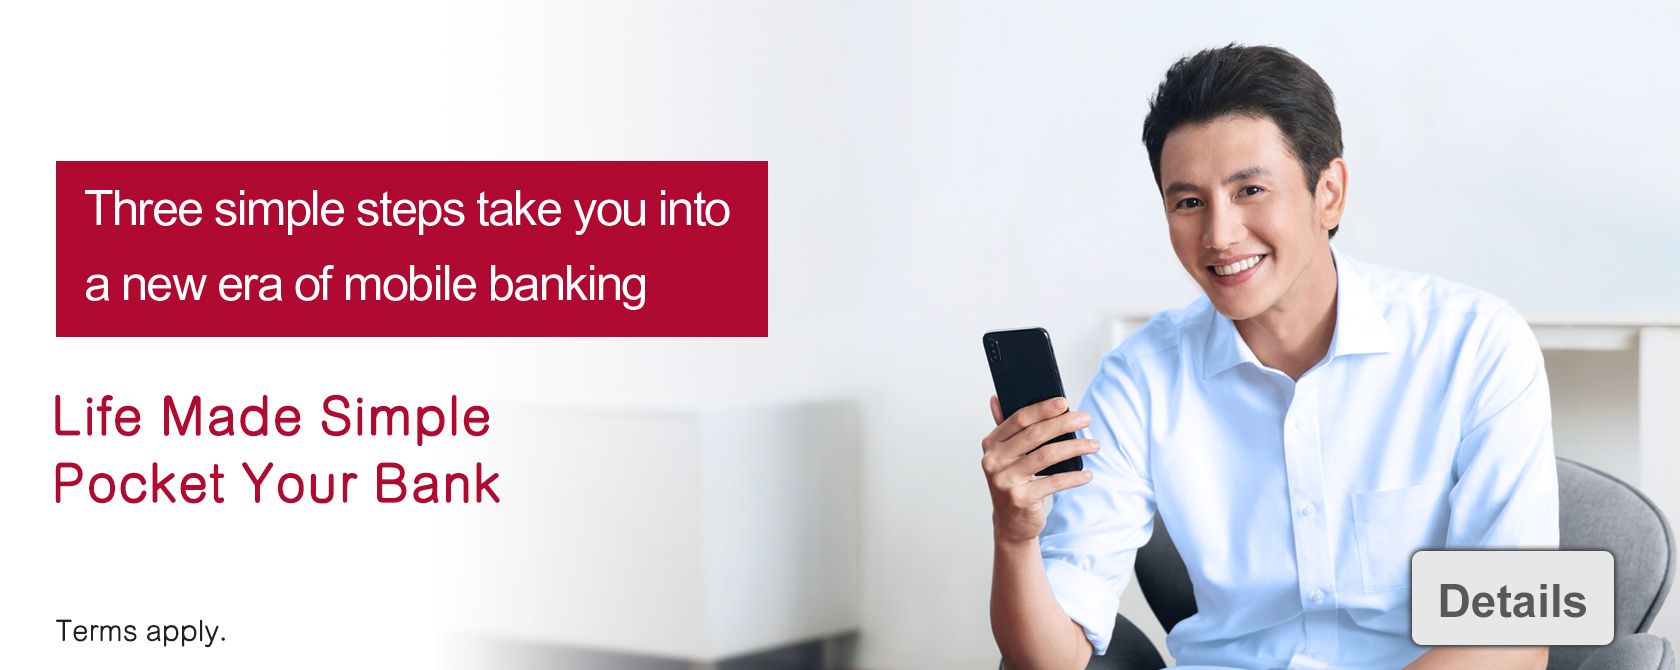 Three simple steps take you into a new era of mobile banking